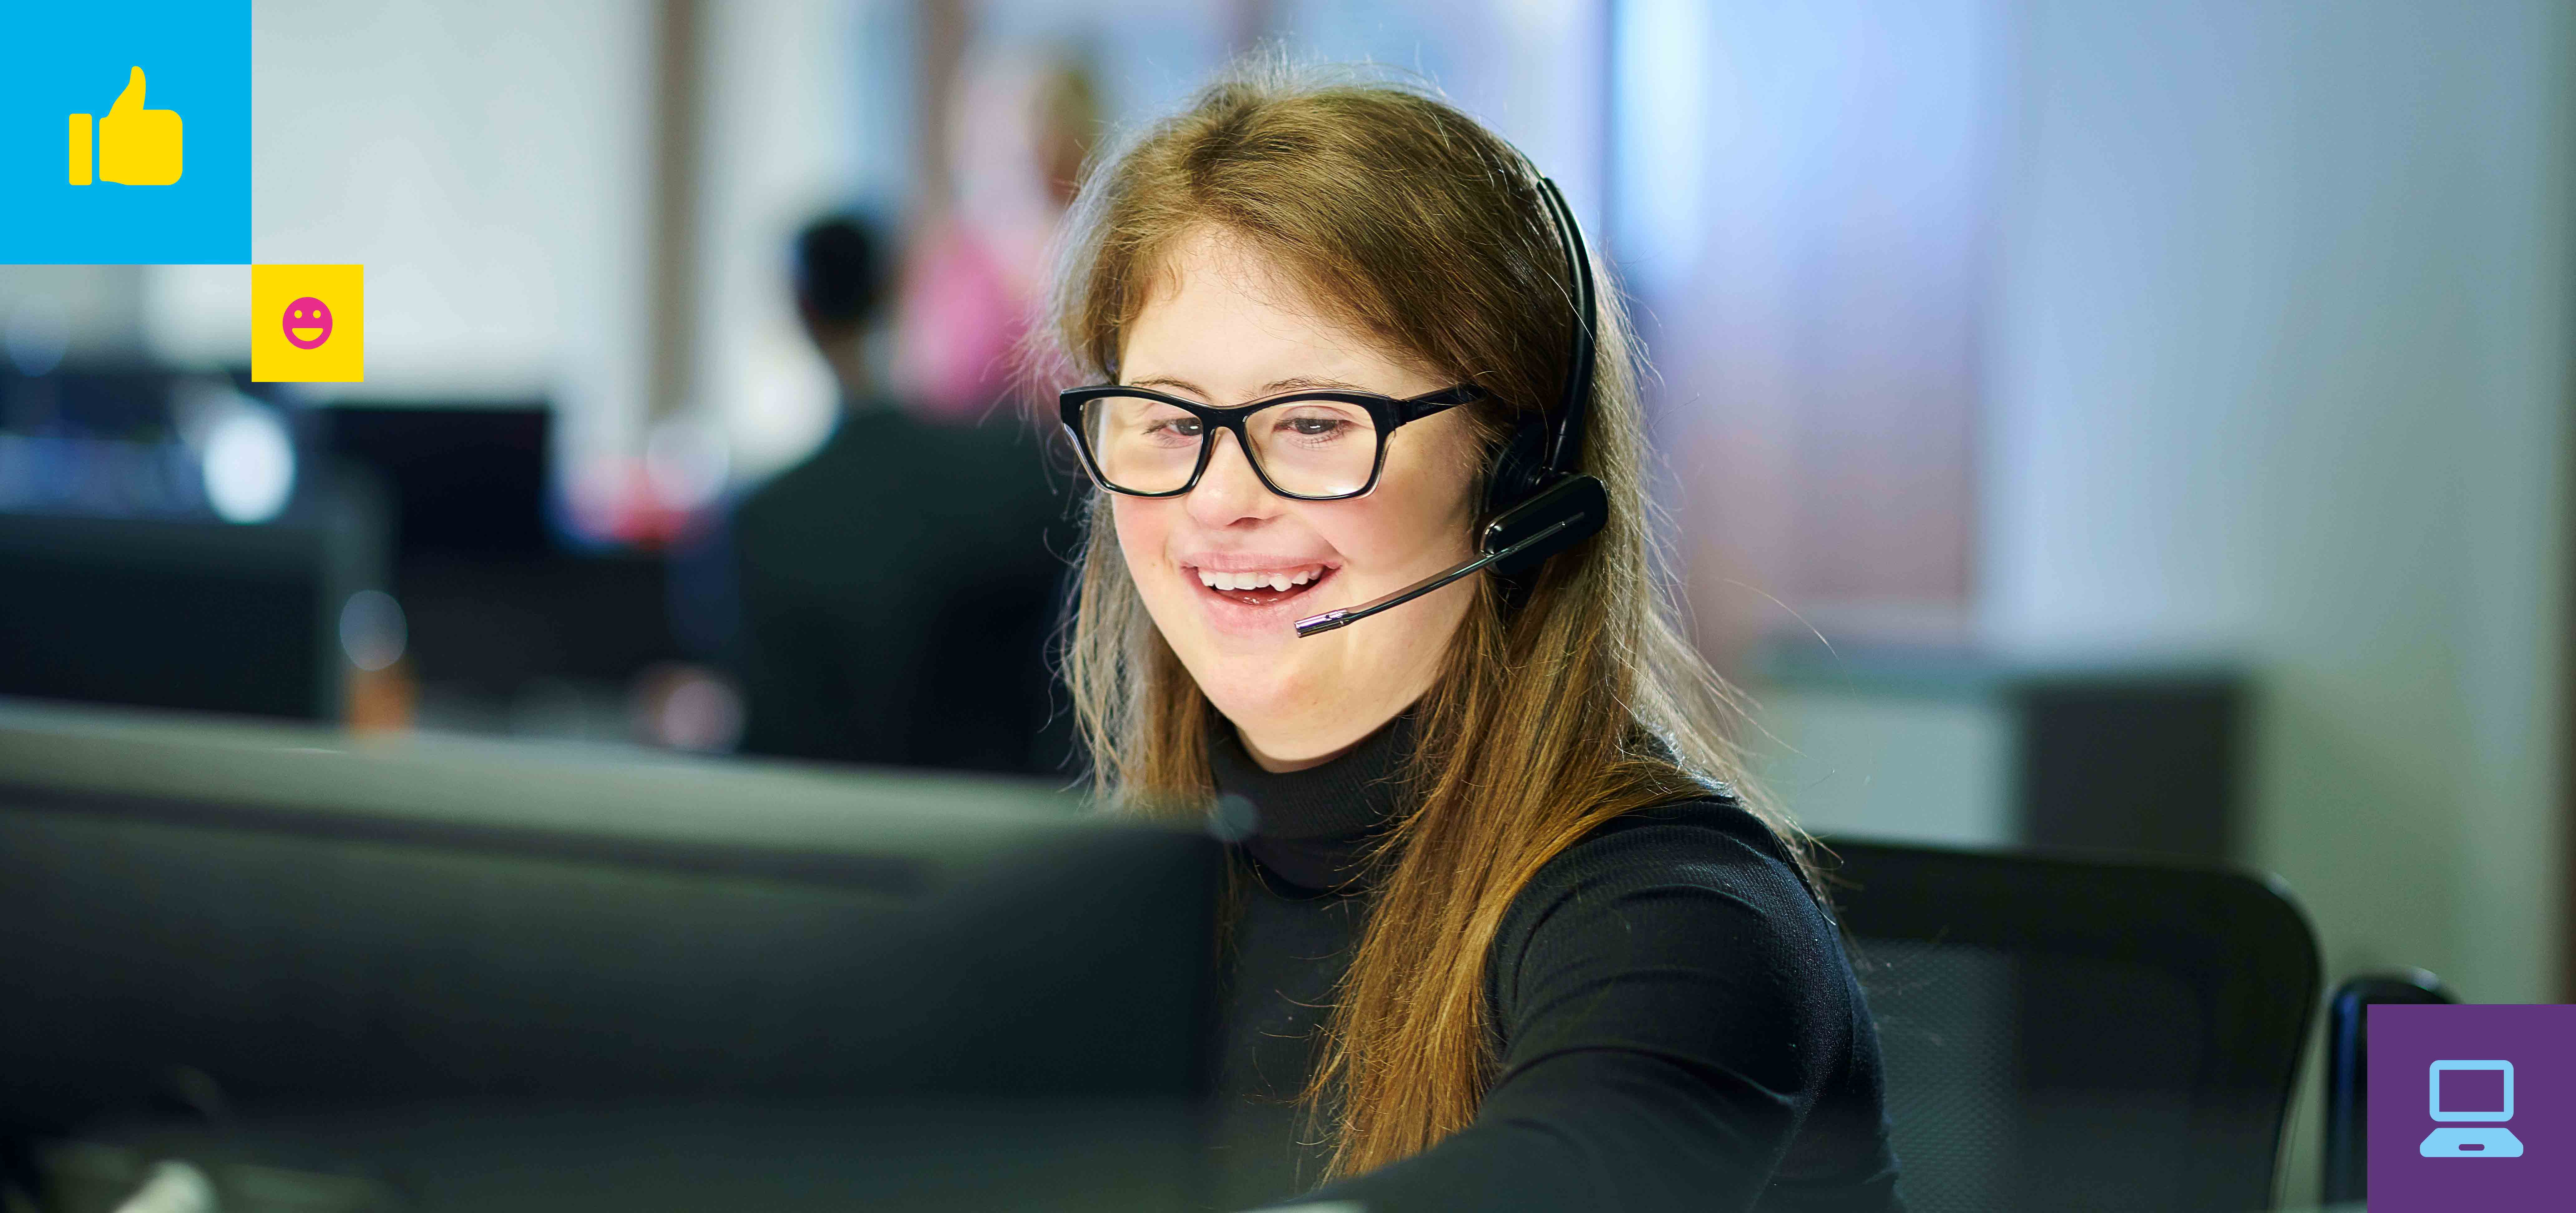 Smiling Apprentice working at a call centre